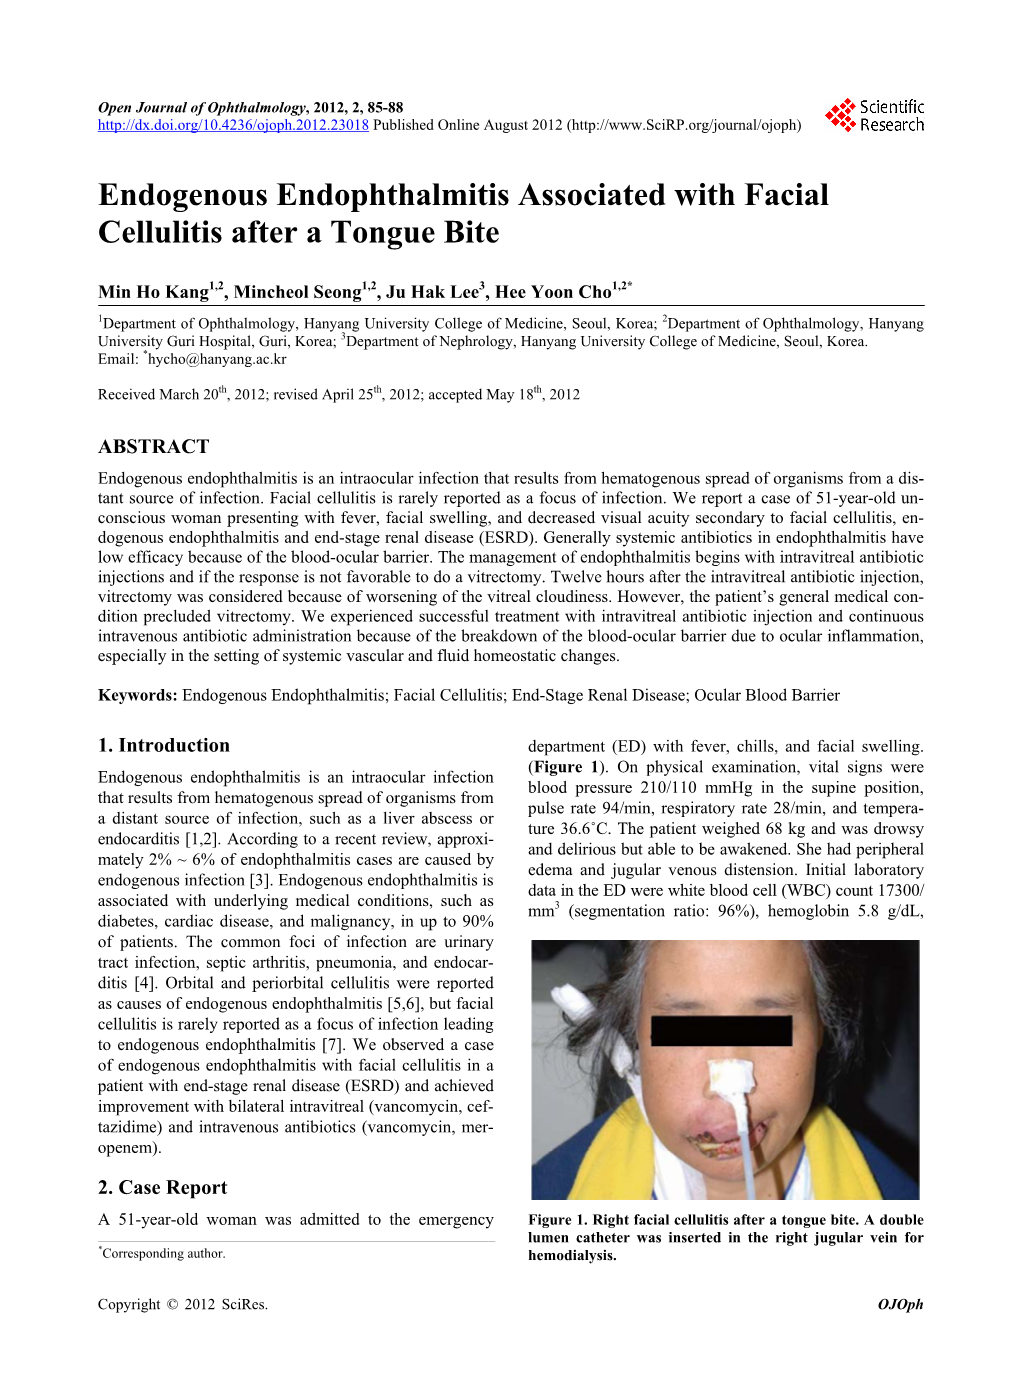 Endogenous Endophthalmitis Associated with Facial Cellulitis After a Tongue Bite